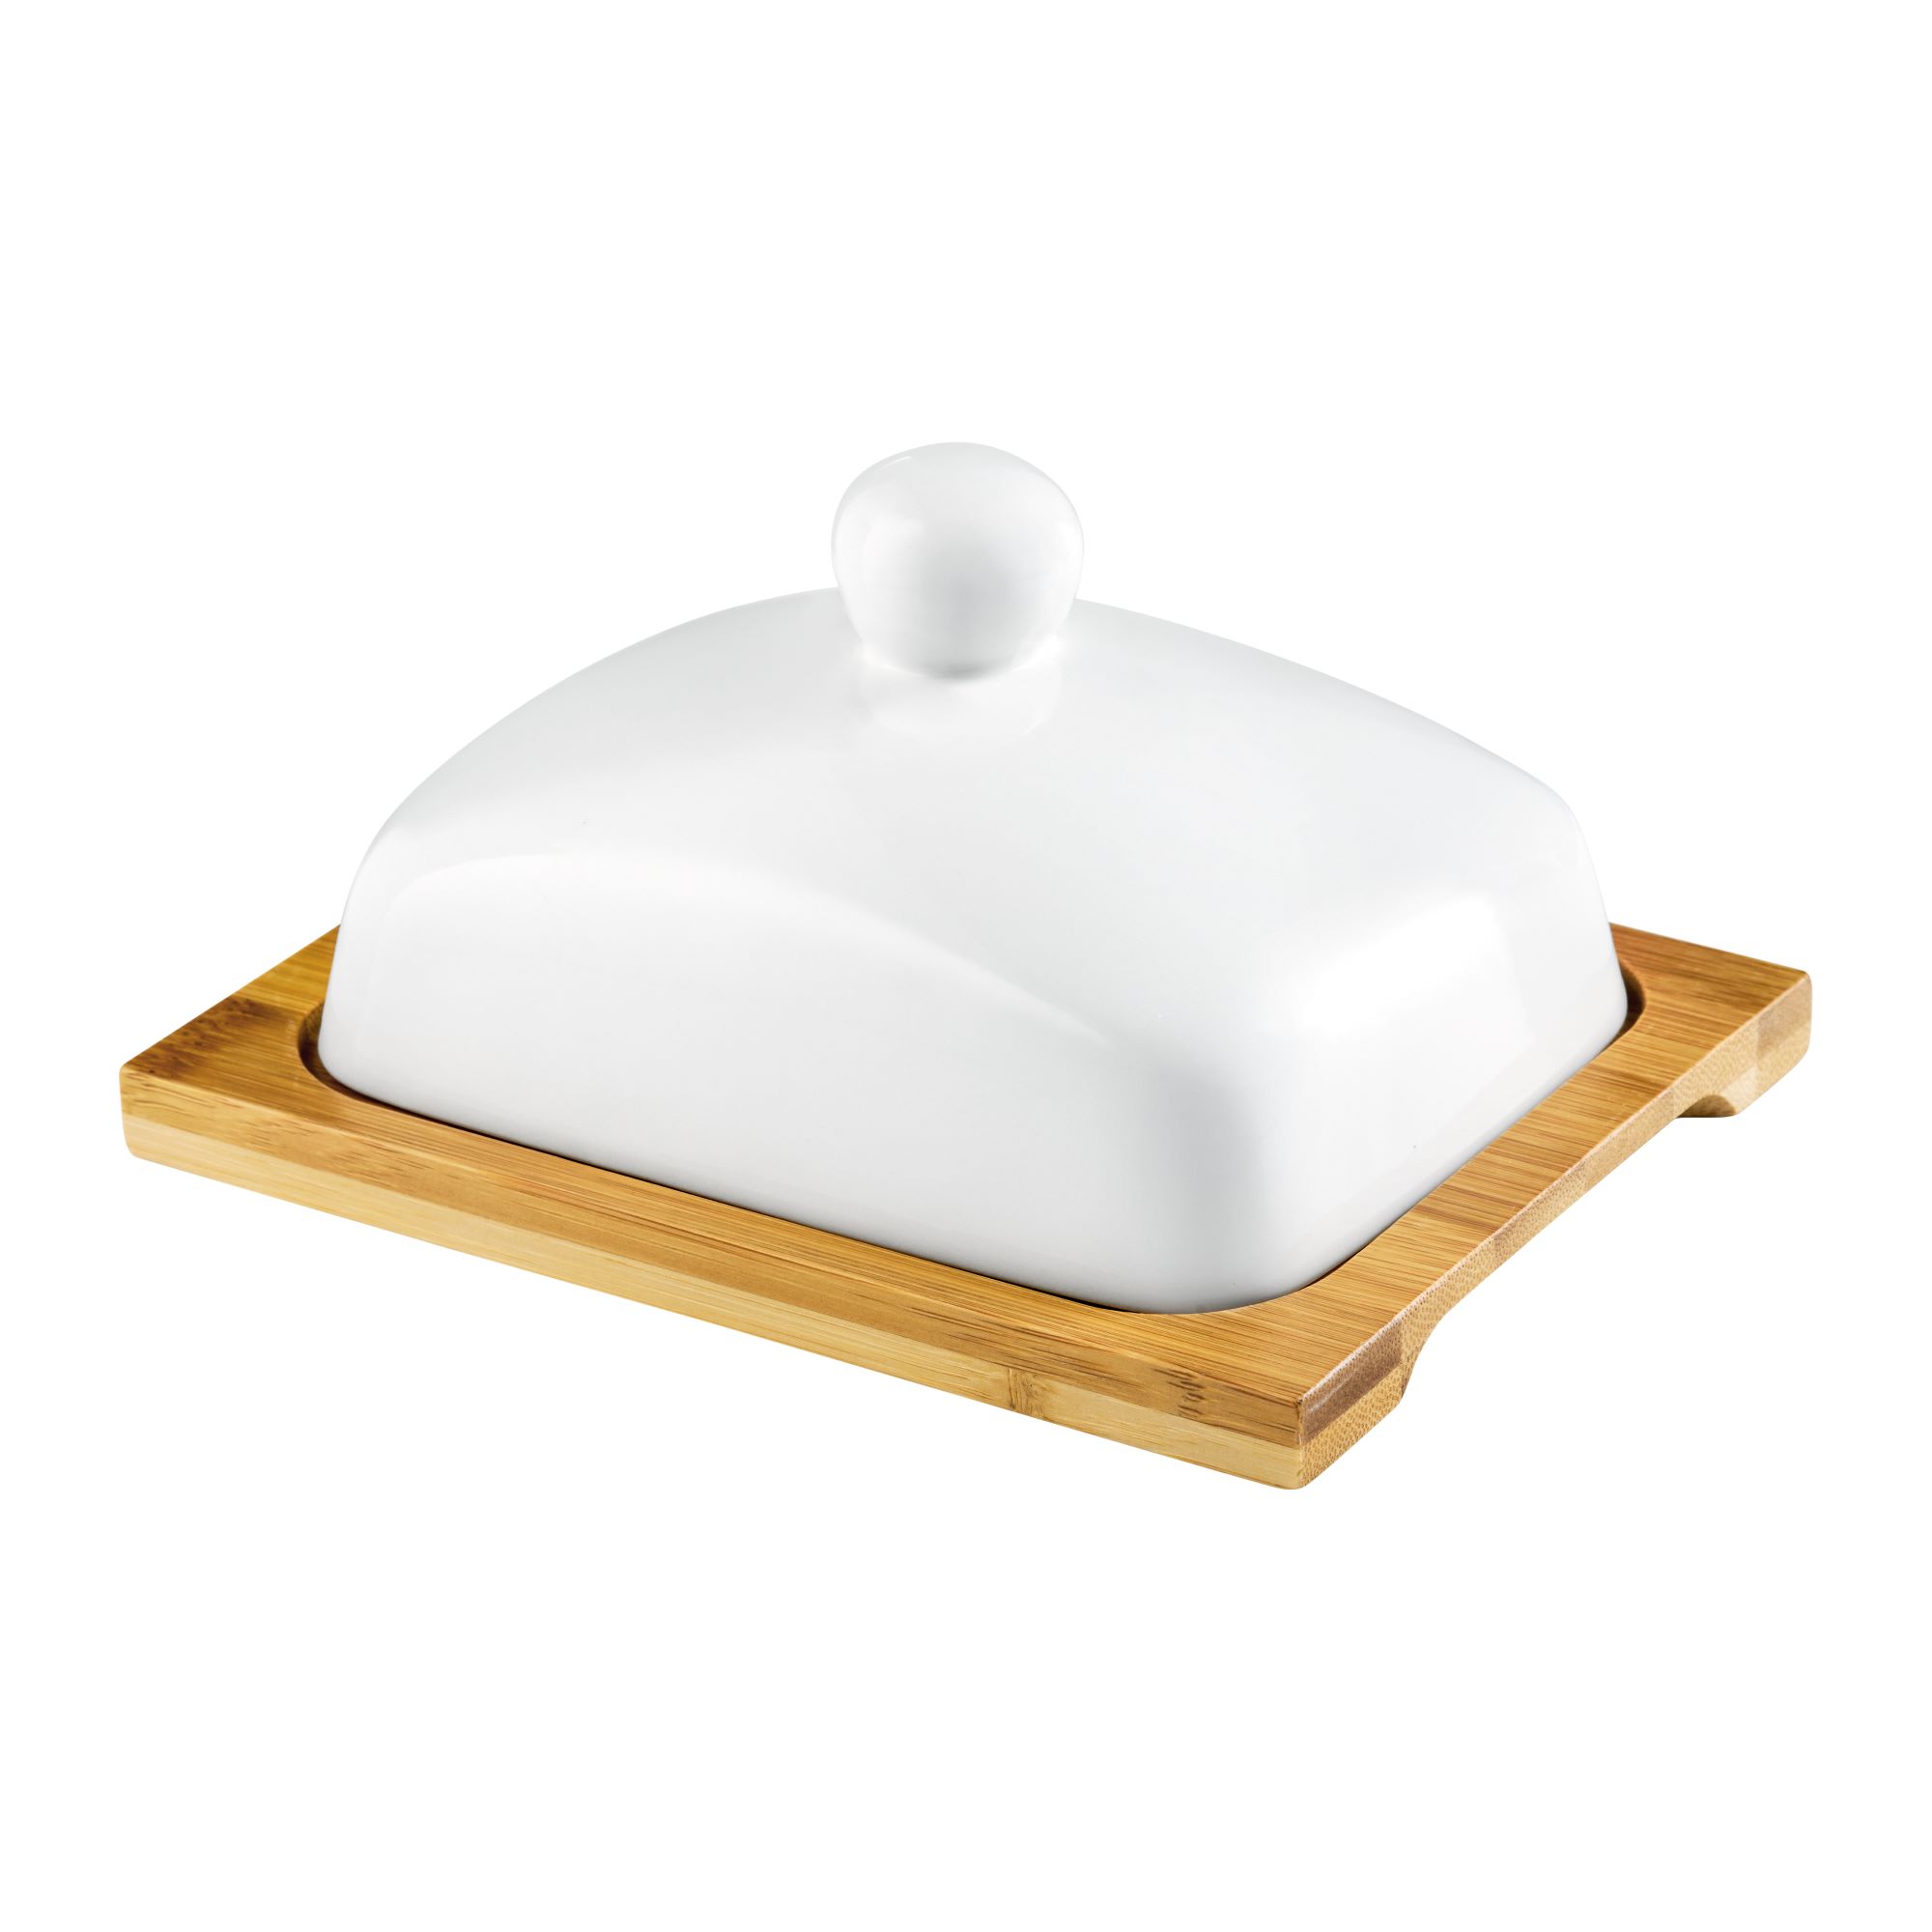 Heart Shaped White Ceramic Butter Dish with Bamboo Base Porcelain Butter Plate,Ceramic Butter Dish Box Container 